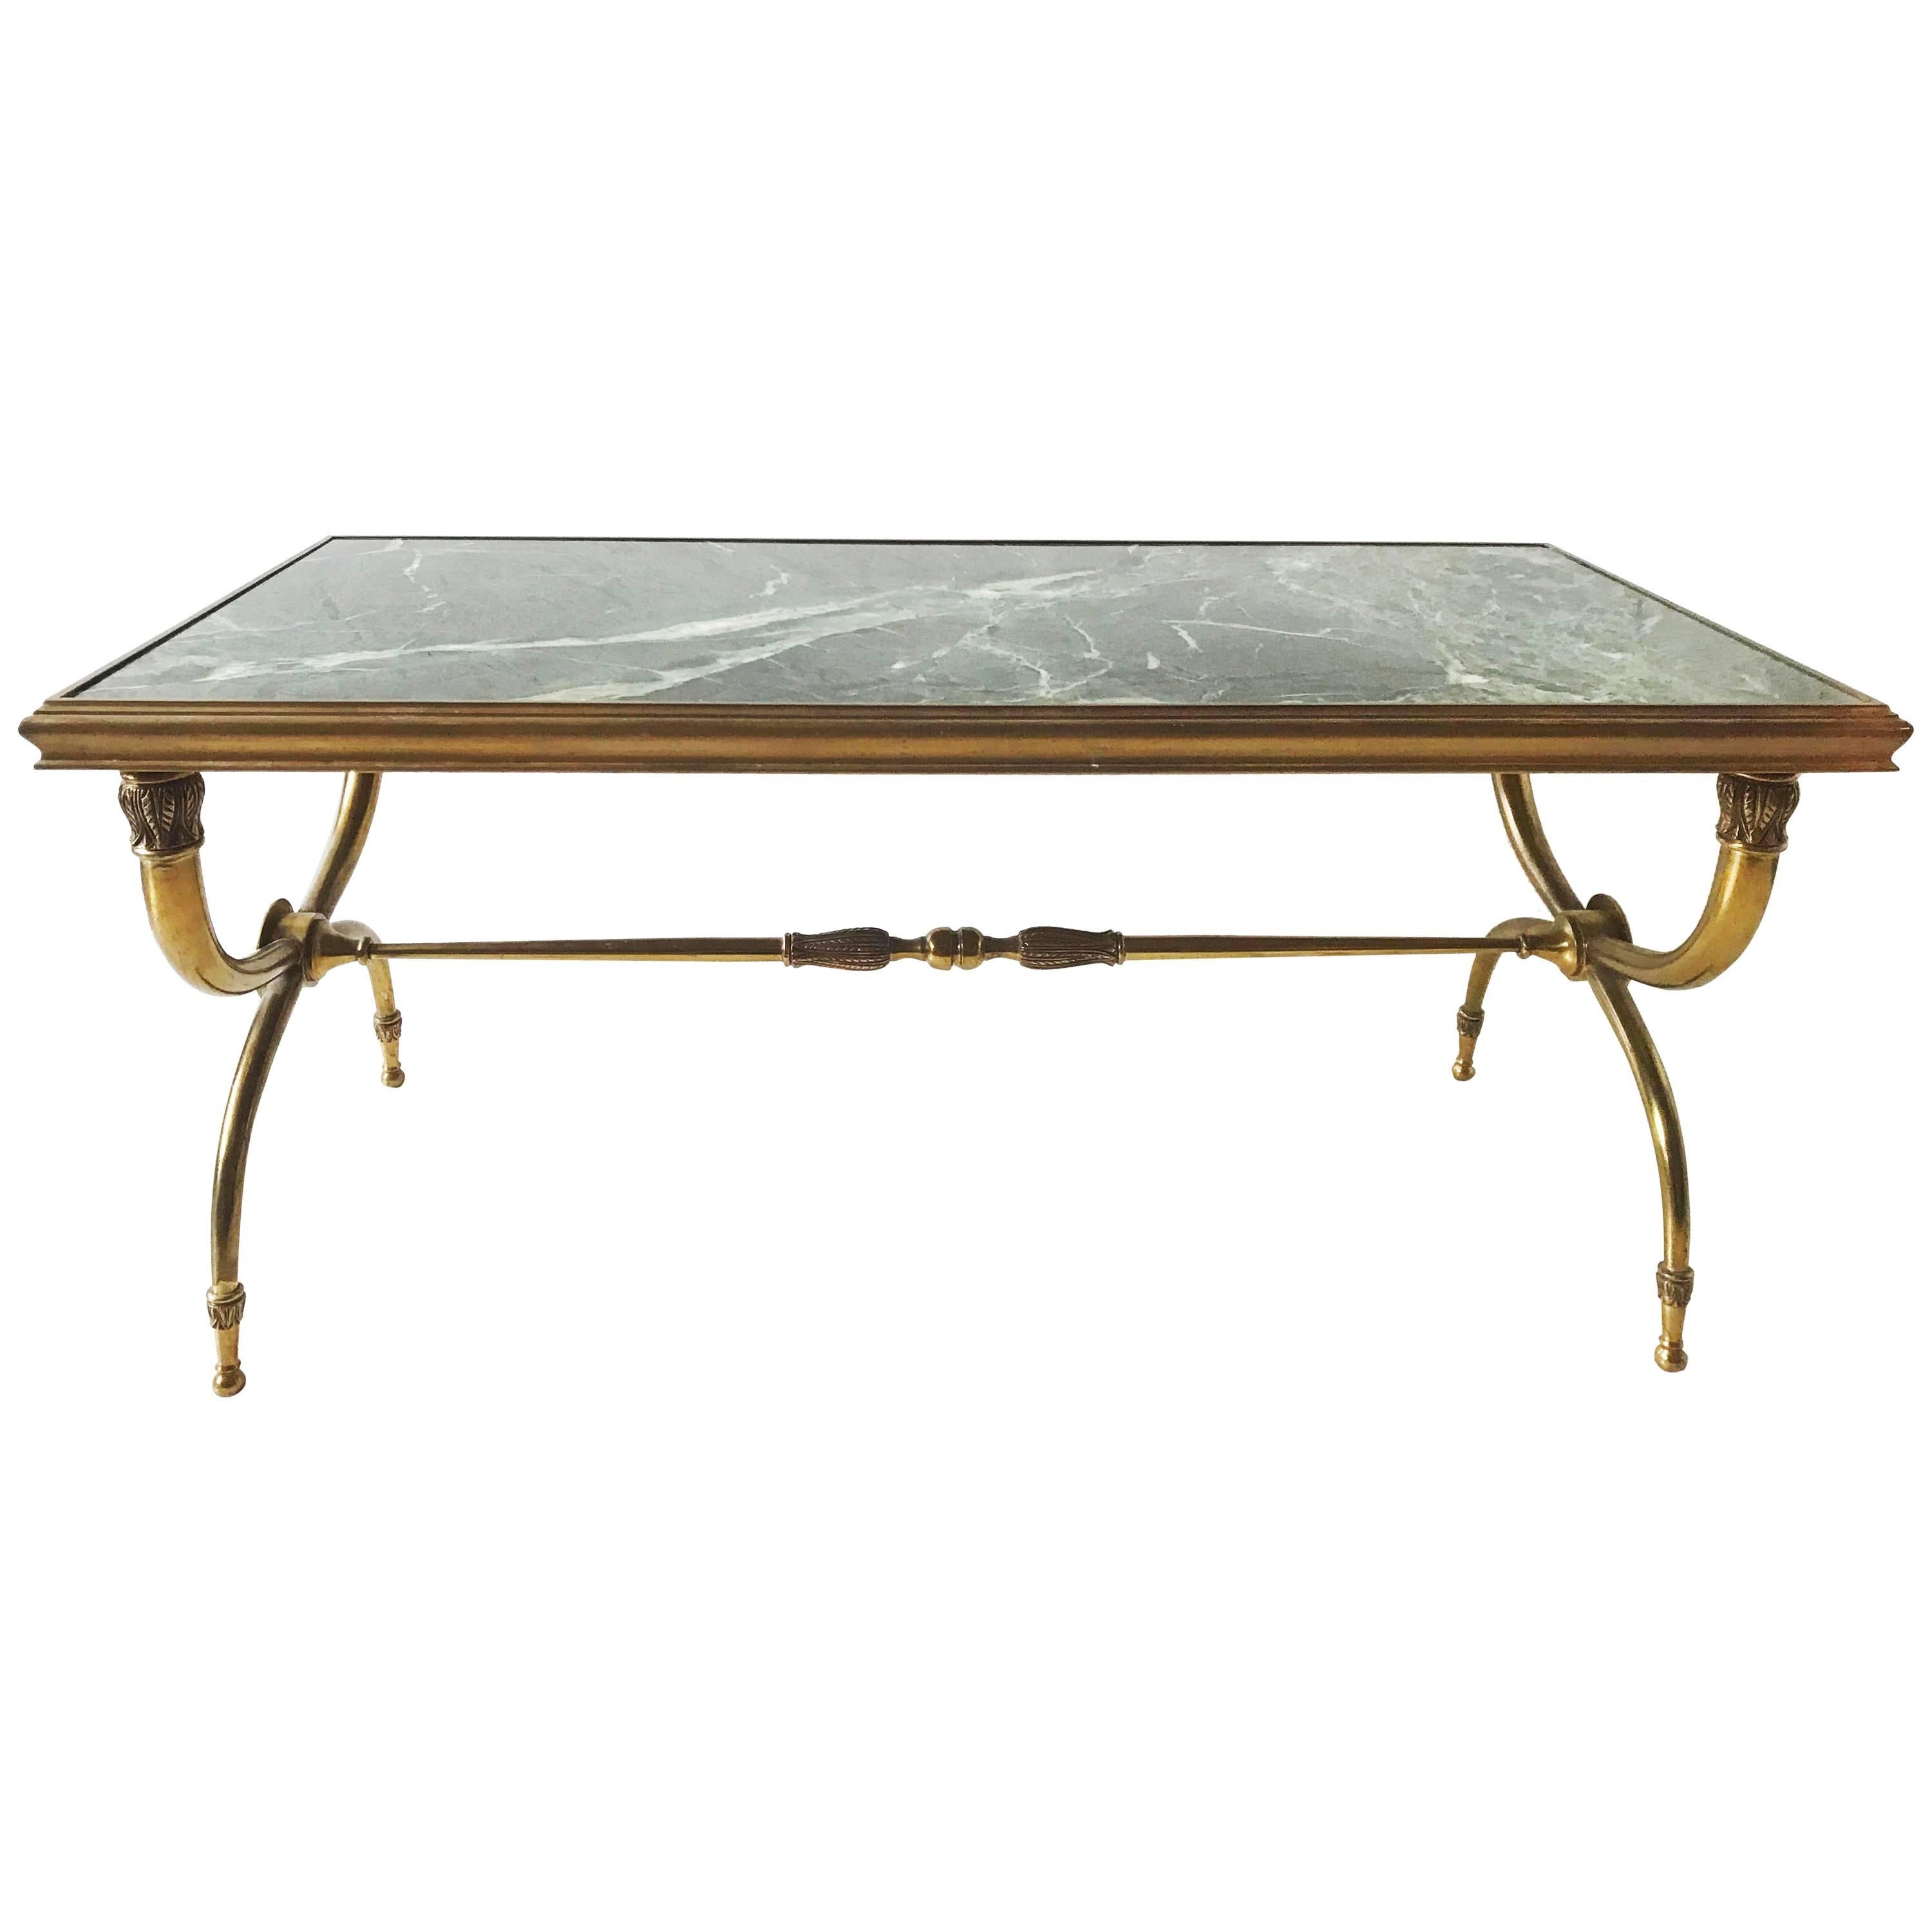 Superb coffee table attributed to Raymond Subes, bronze and 
Vert de Mer marble top, very heavy and sturdy.
Pair available.